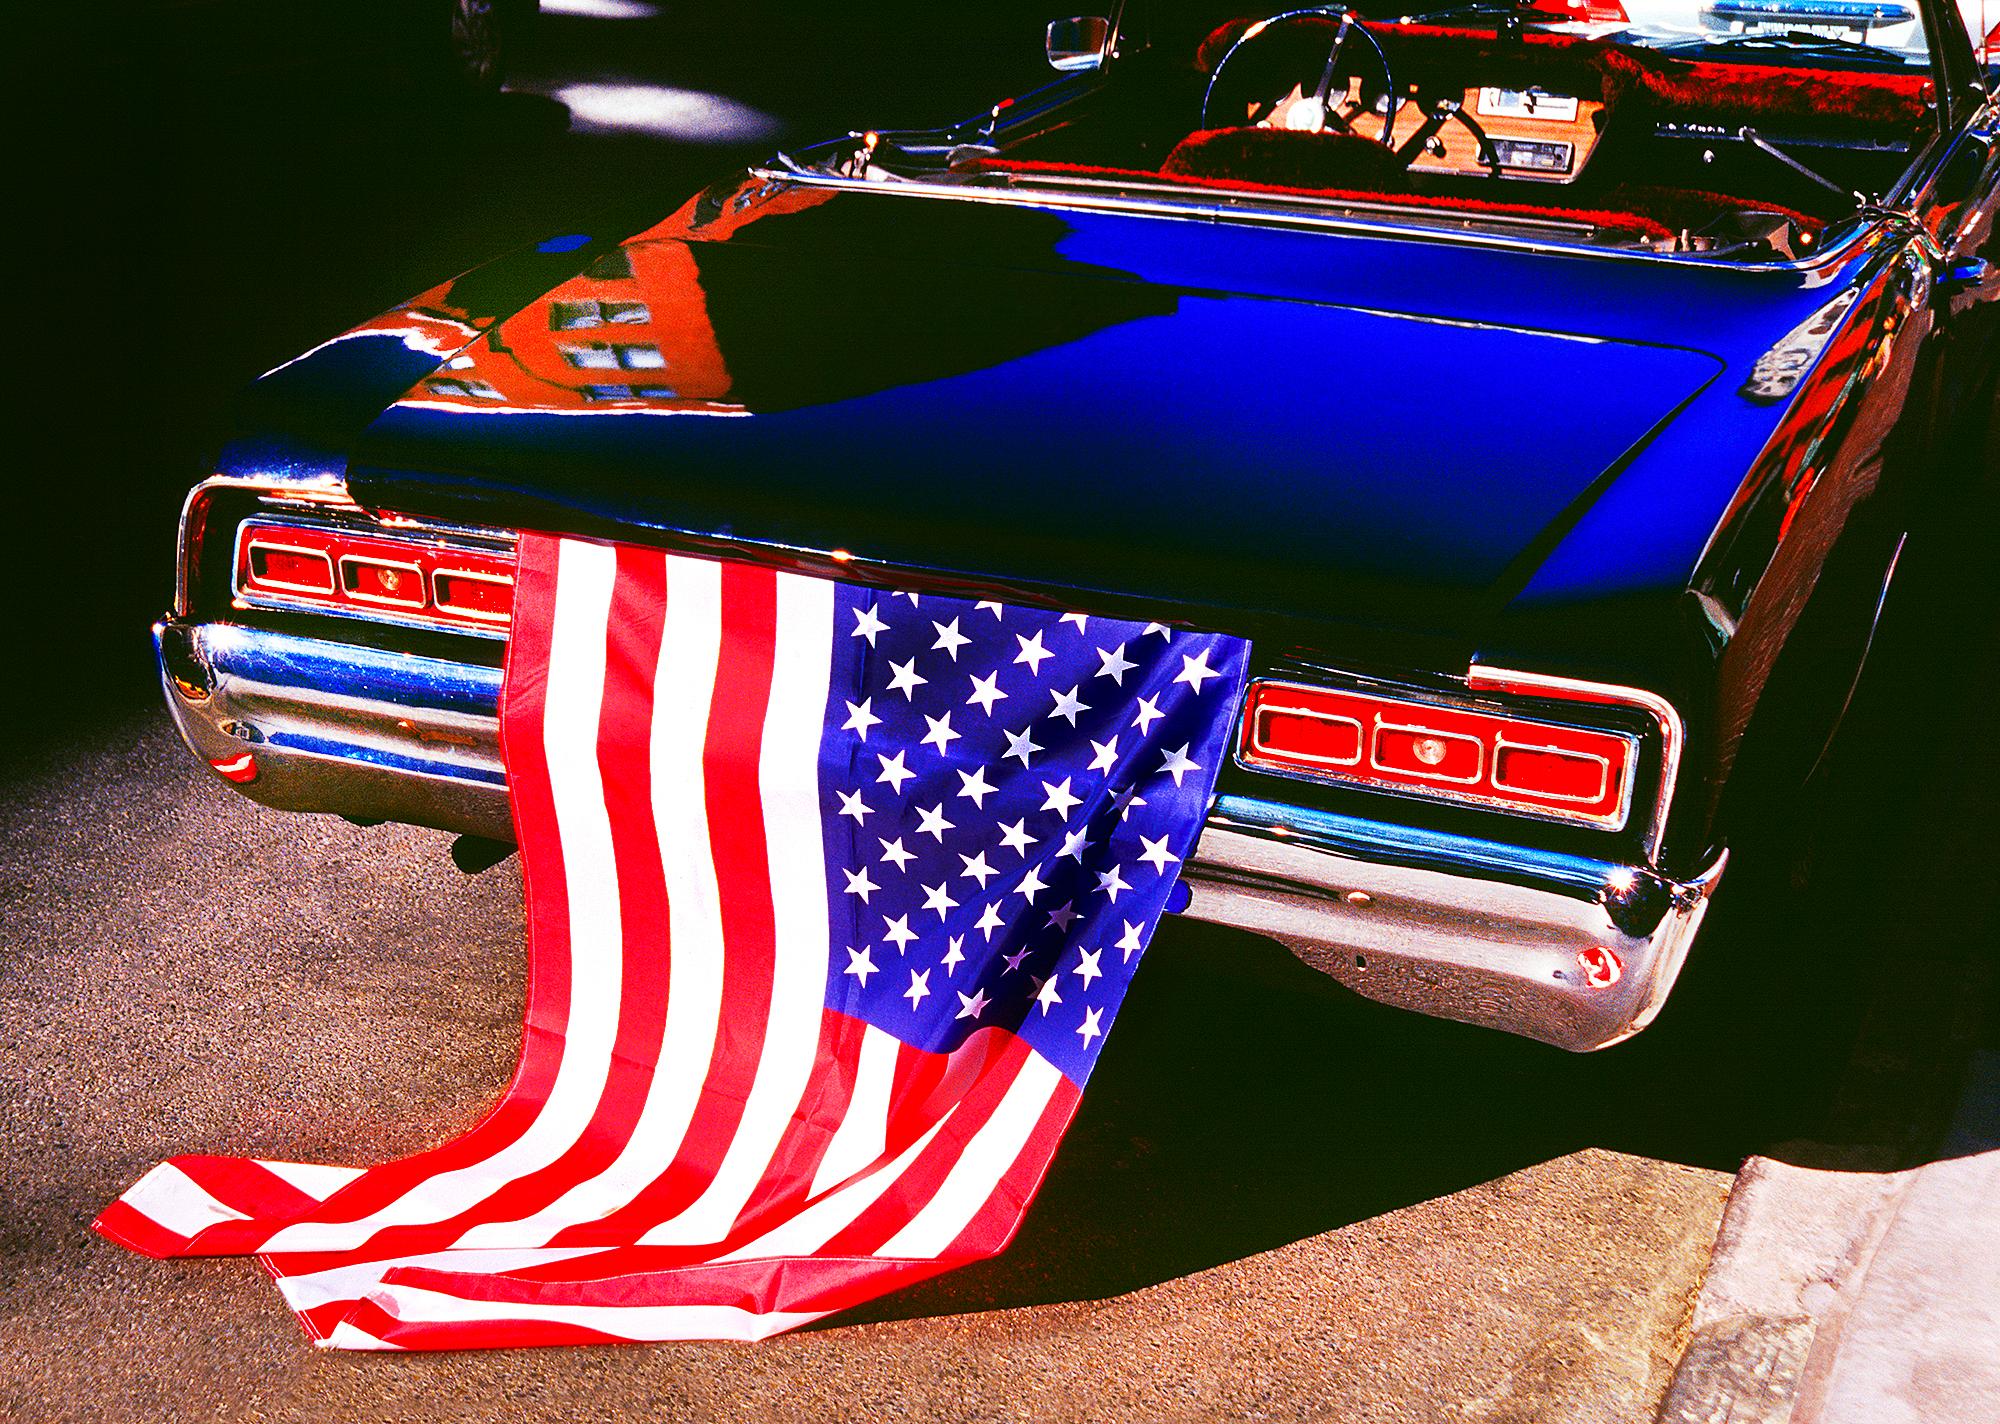 American Flag with Retro Mid-Century Car - Red and Blue - Street Photography